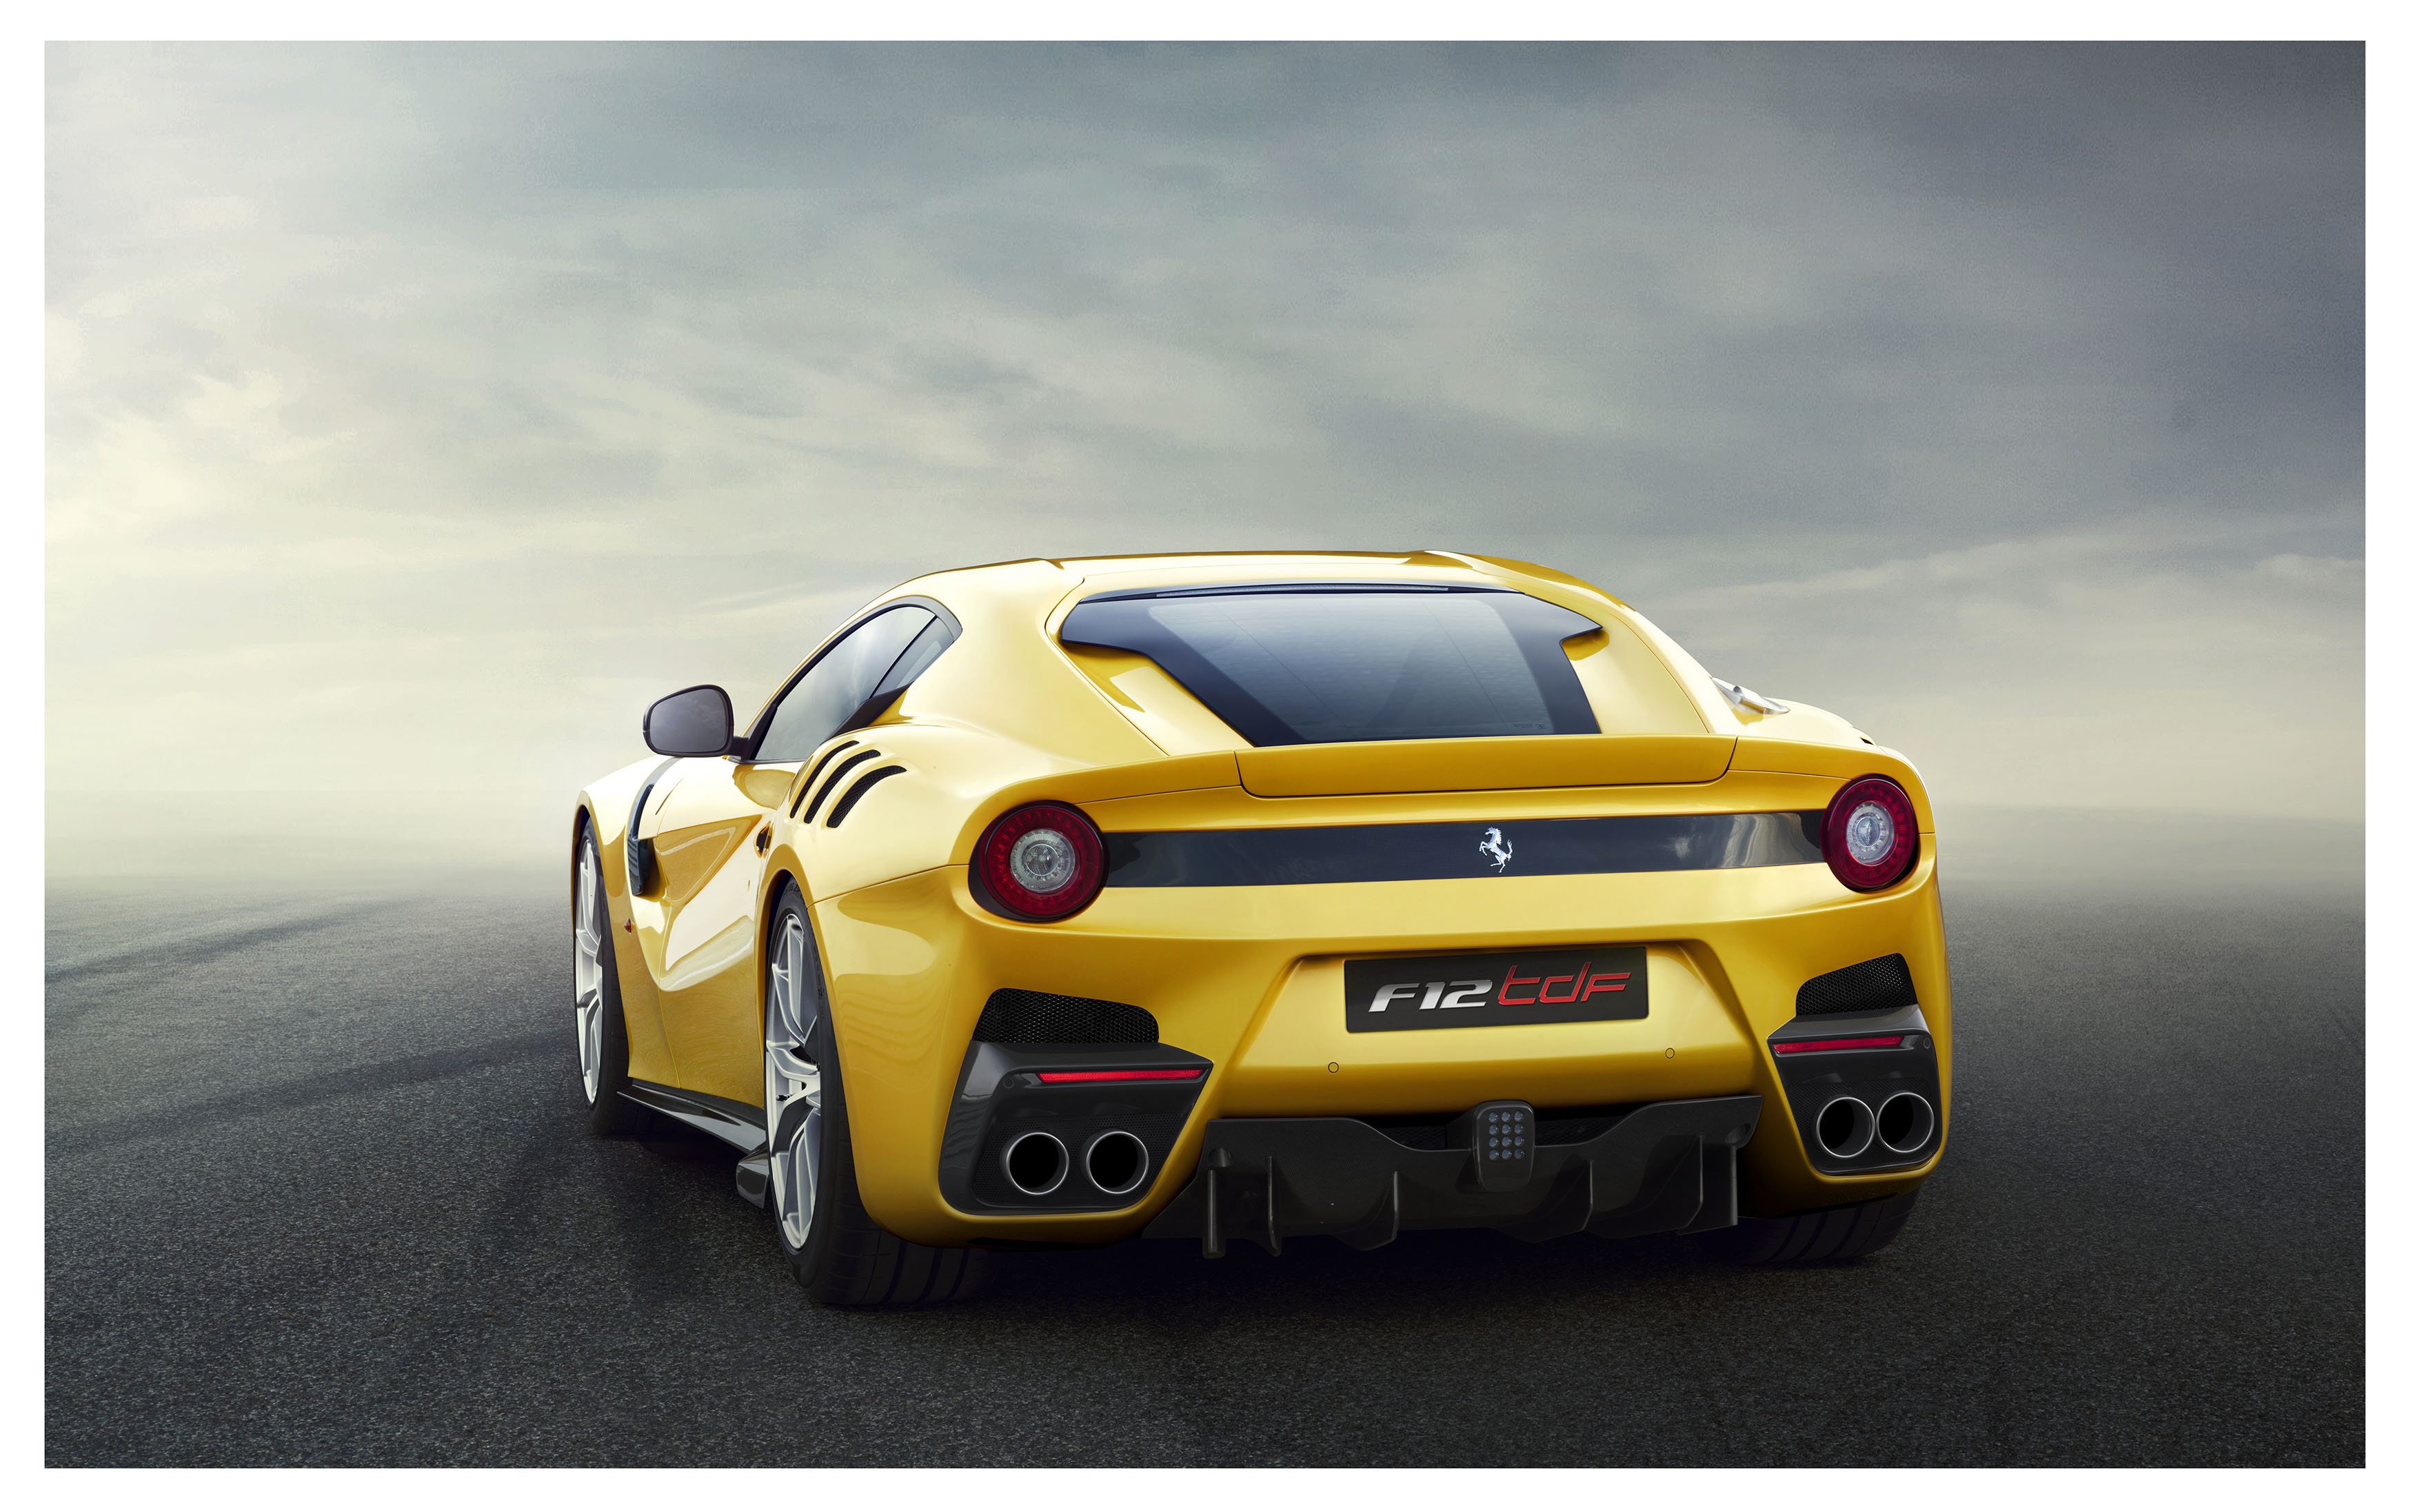 First pictures and full details of Ferrari F12tdf supercar